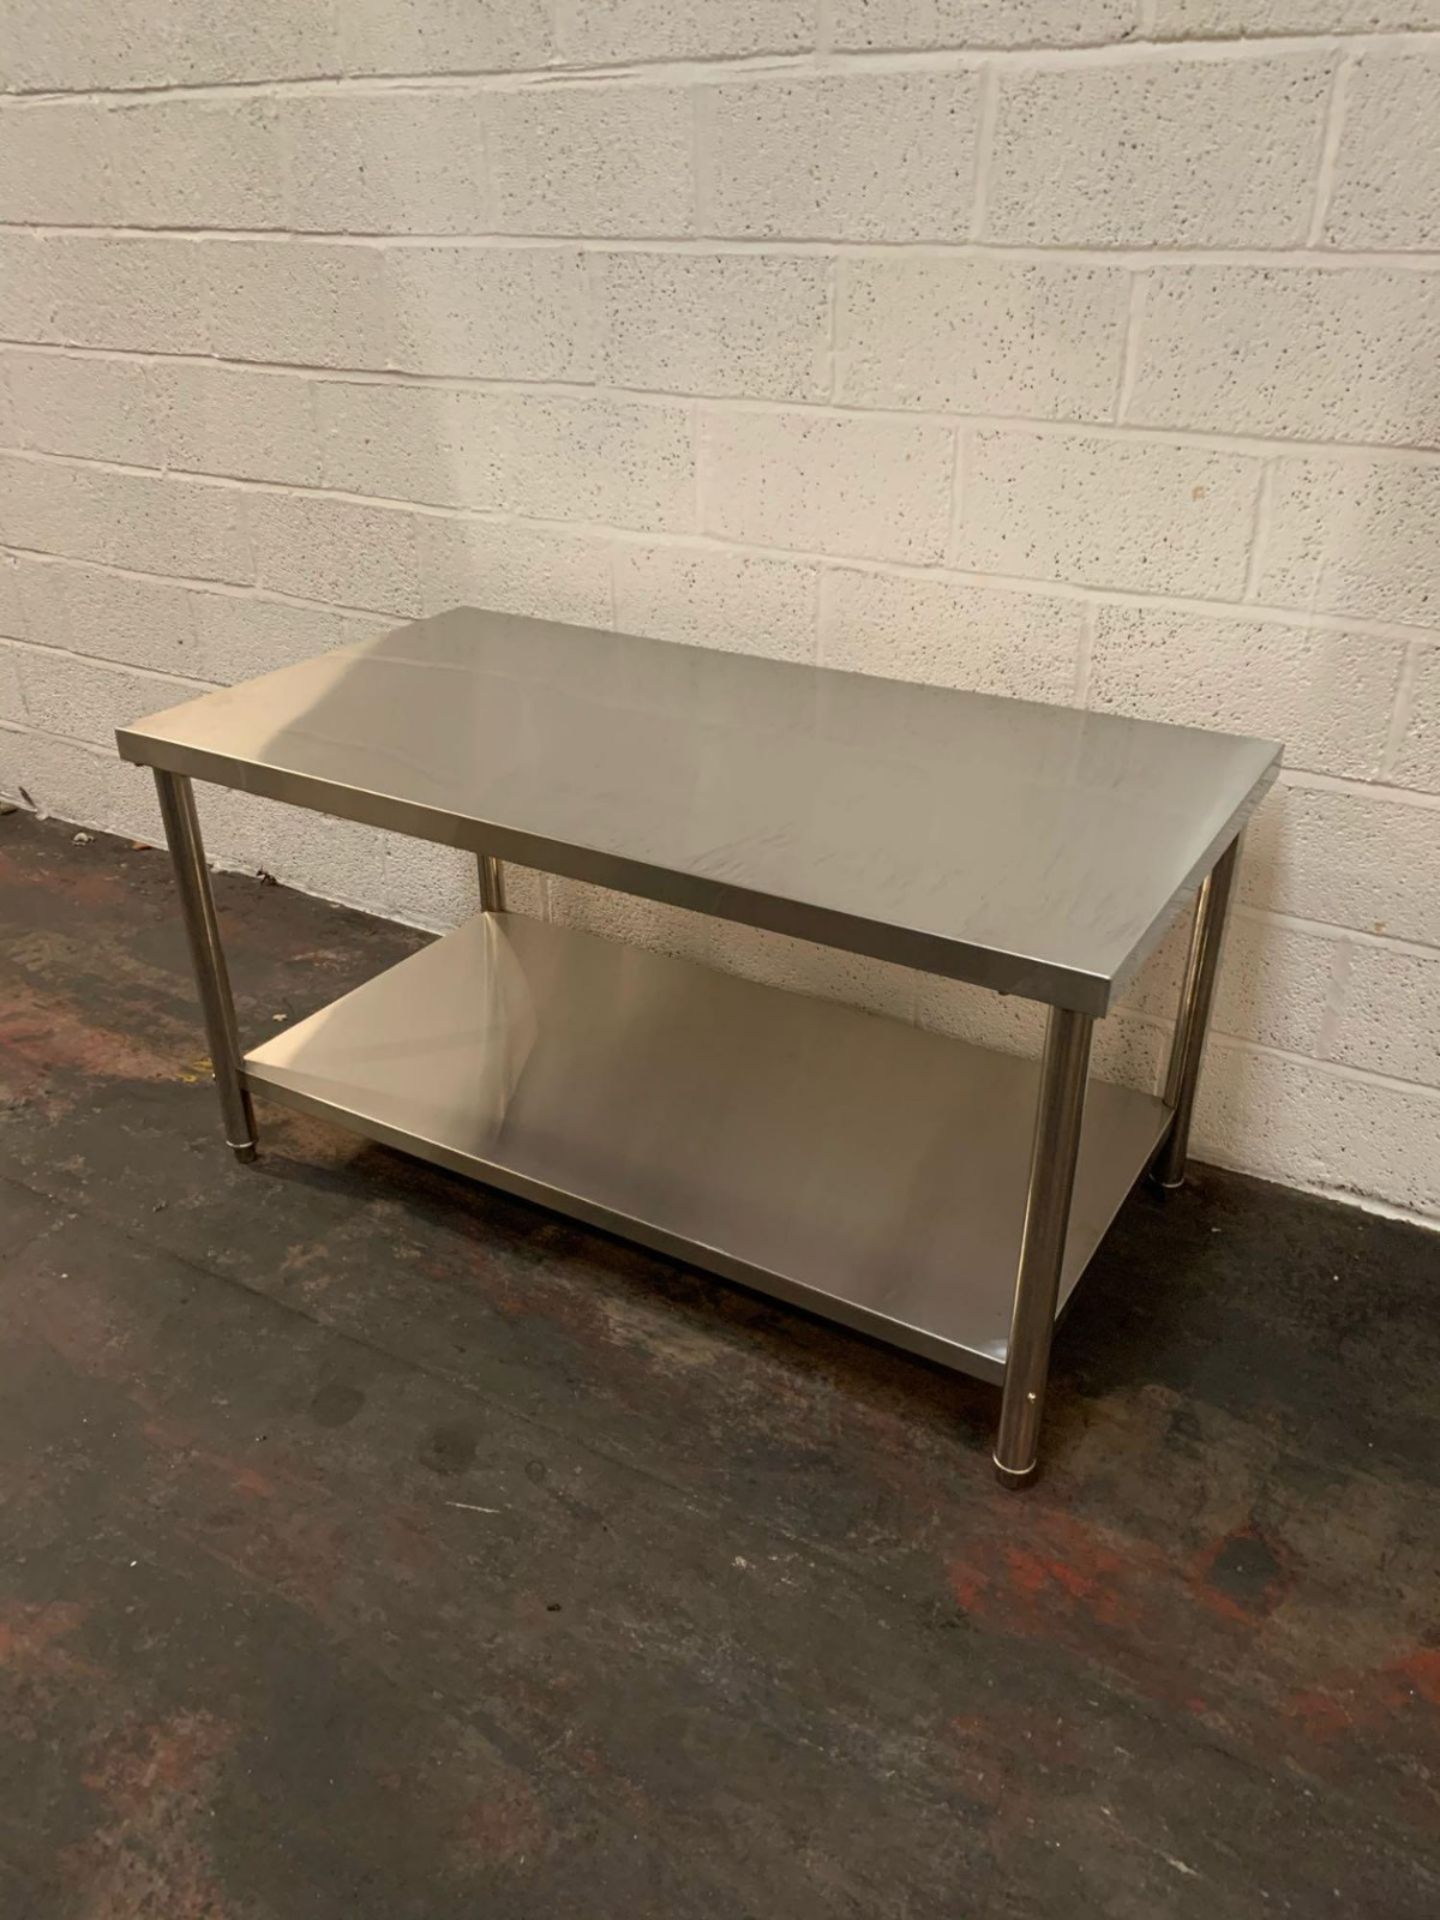 Stainless Steel Work table with Undershelf 1100x600x800mm New in box